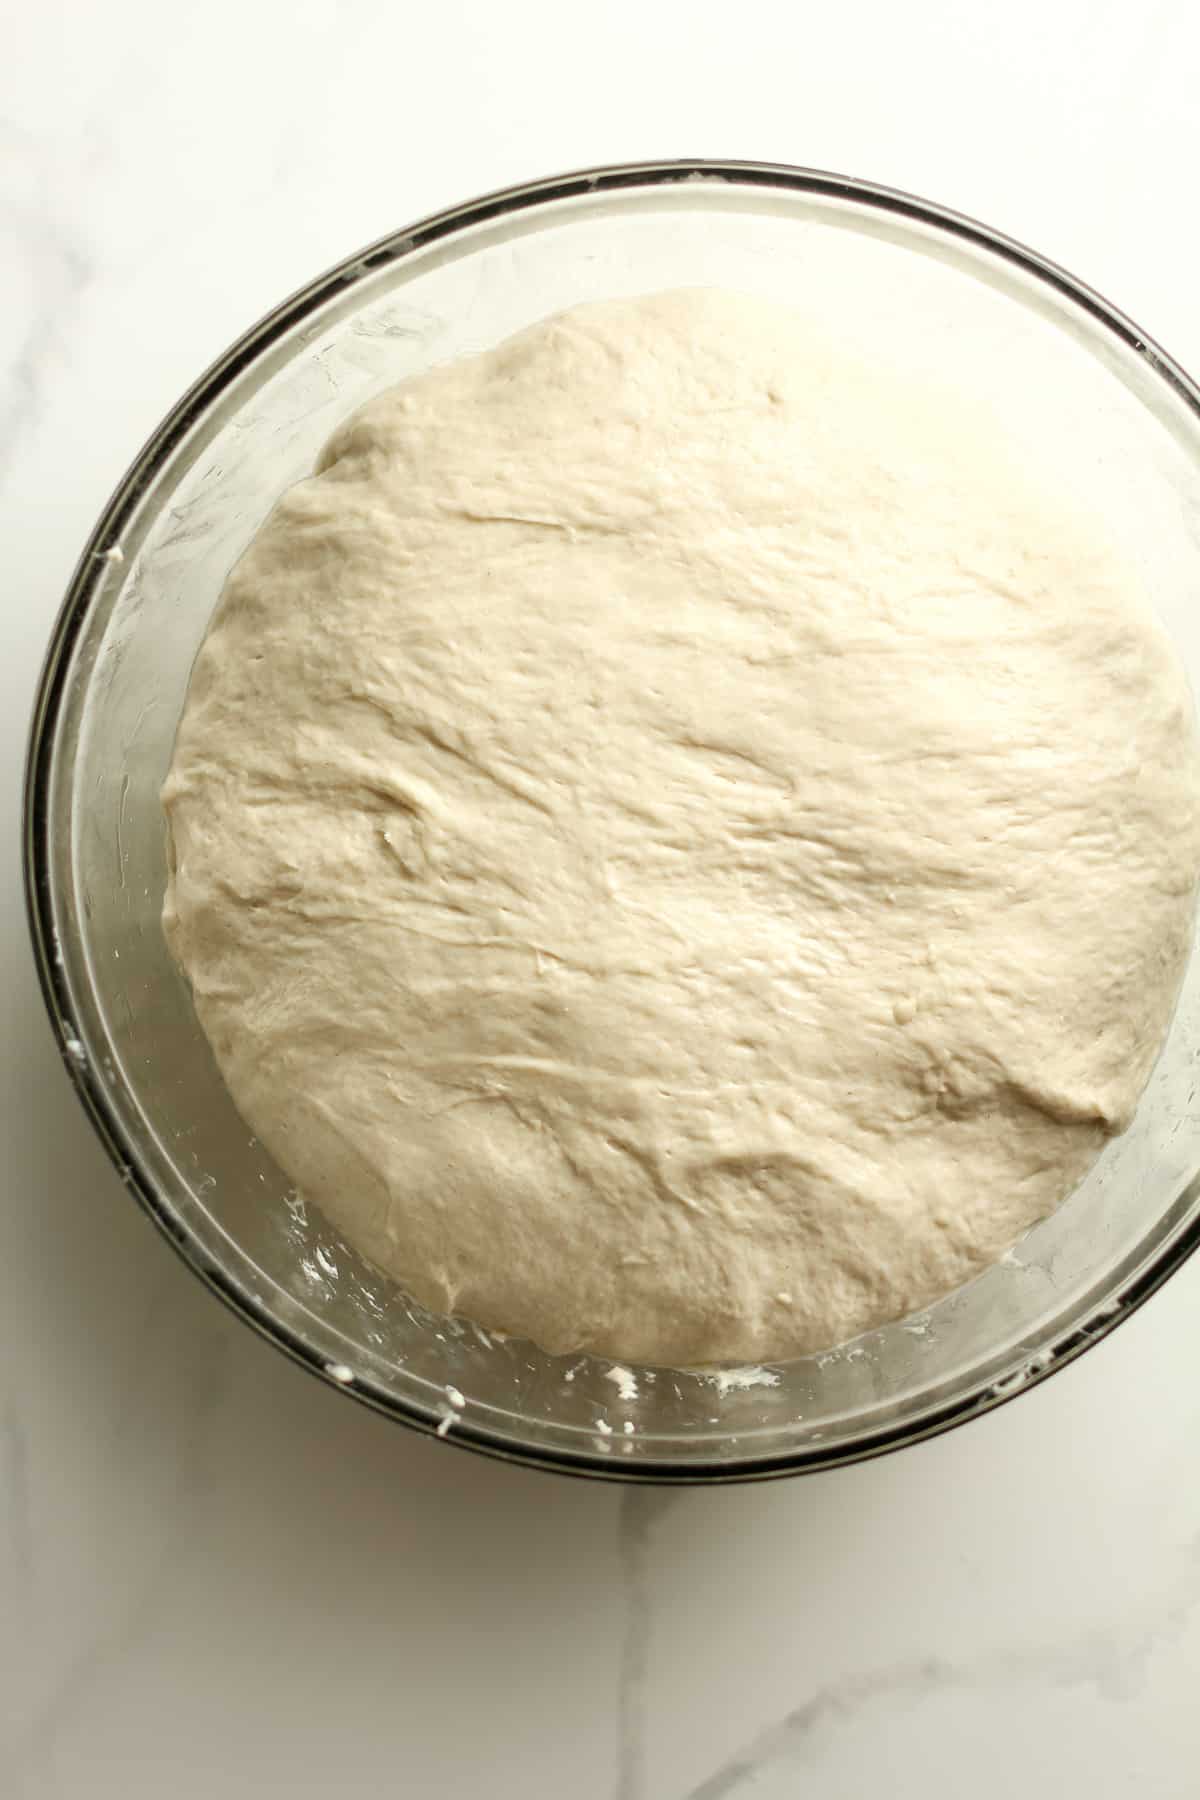 The dough before rising.